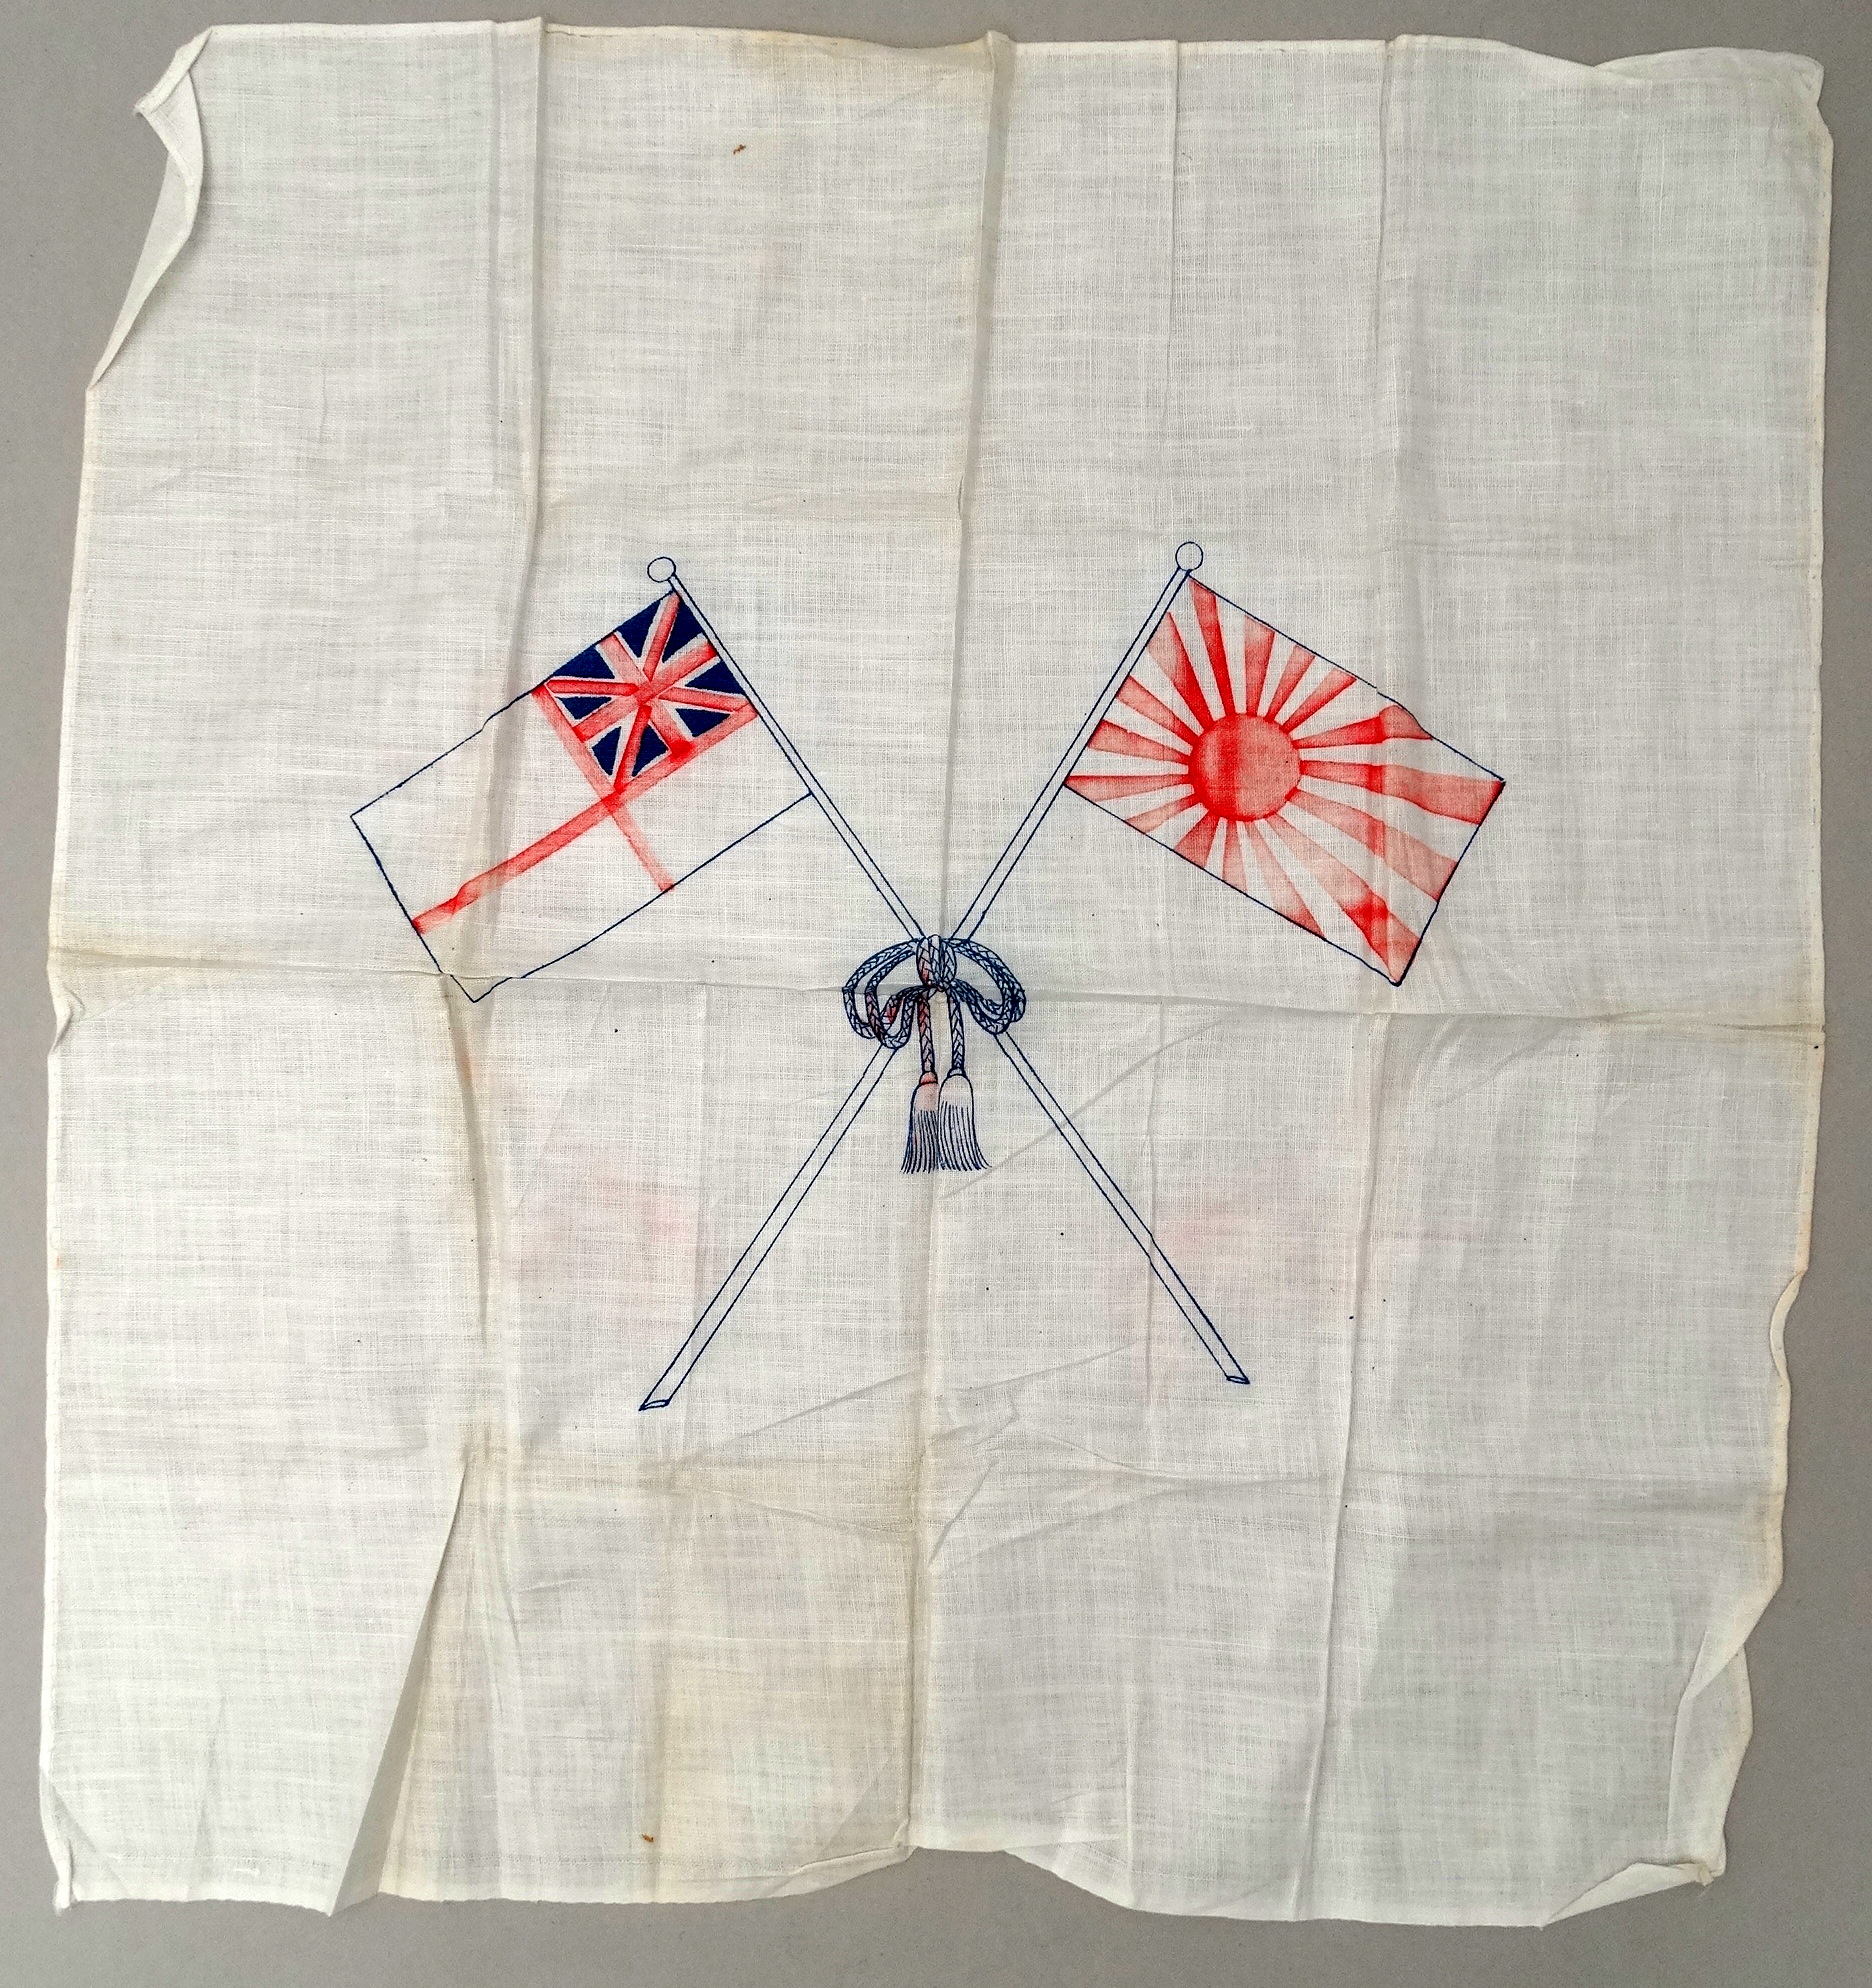 An Anglo-Japanese Alliance (1912-1923) silk handkerchief - decorated with the Royal Navy ensign